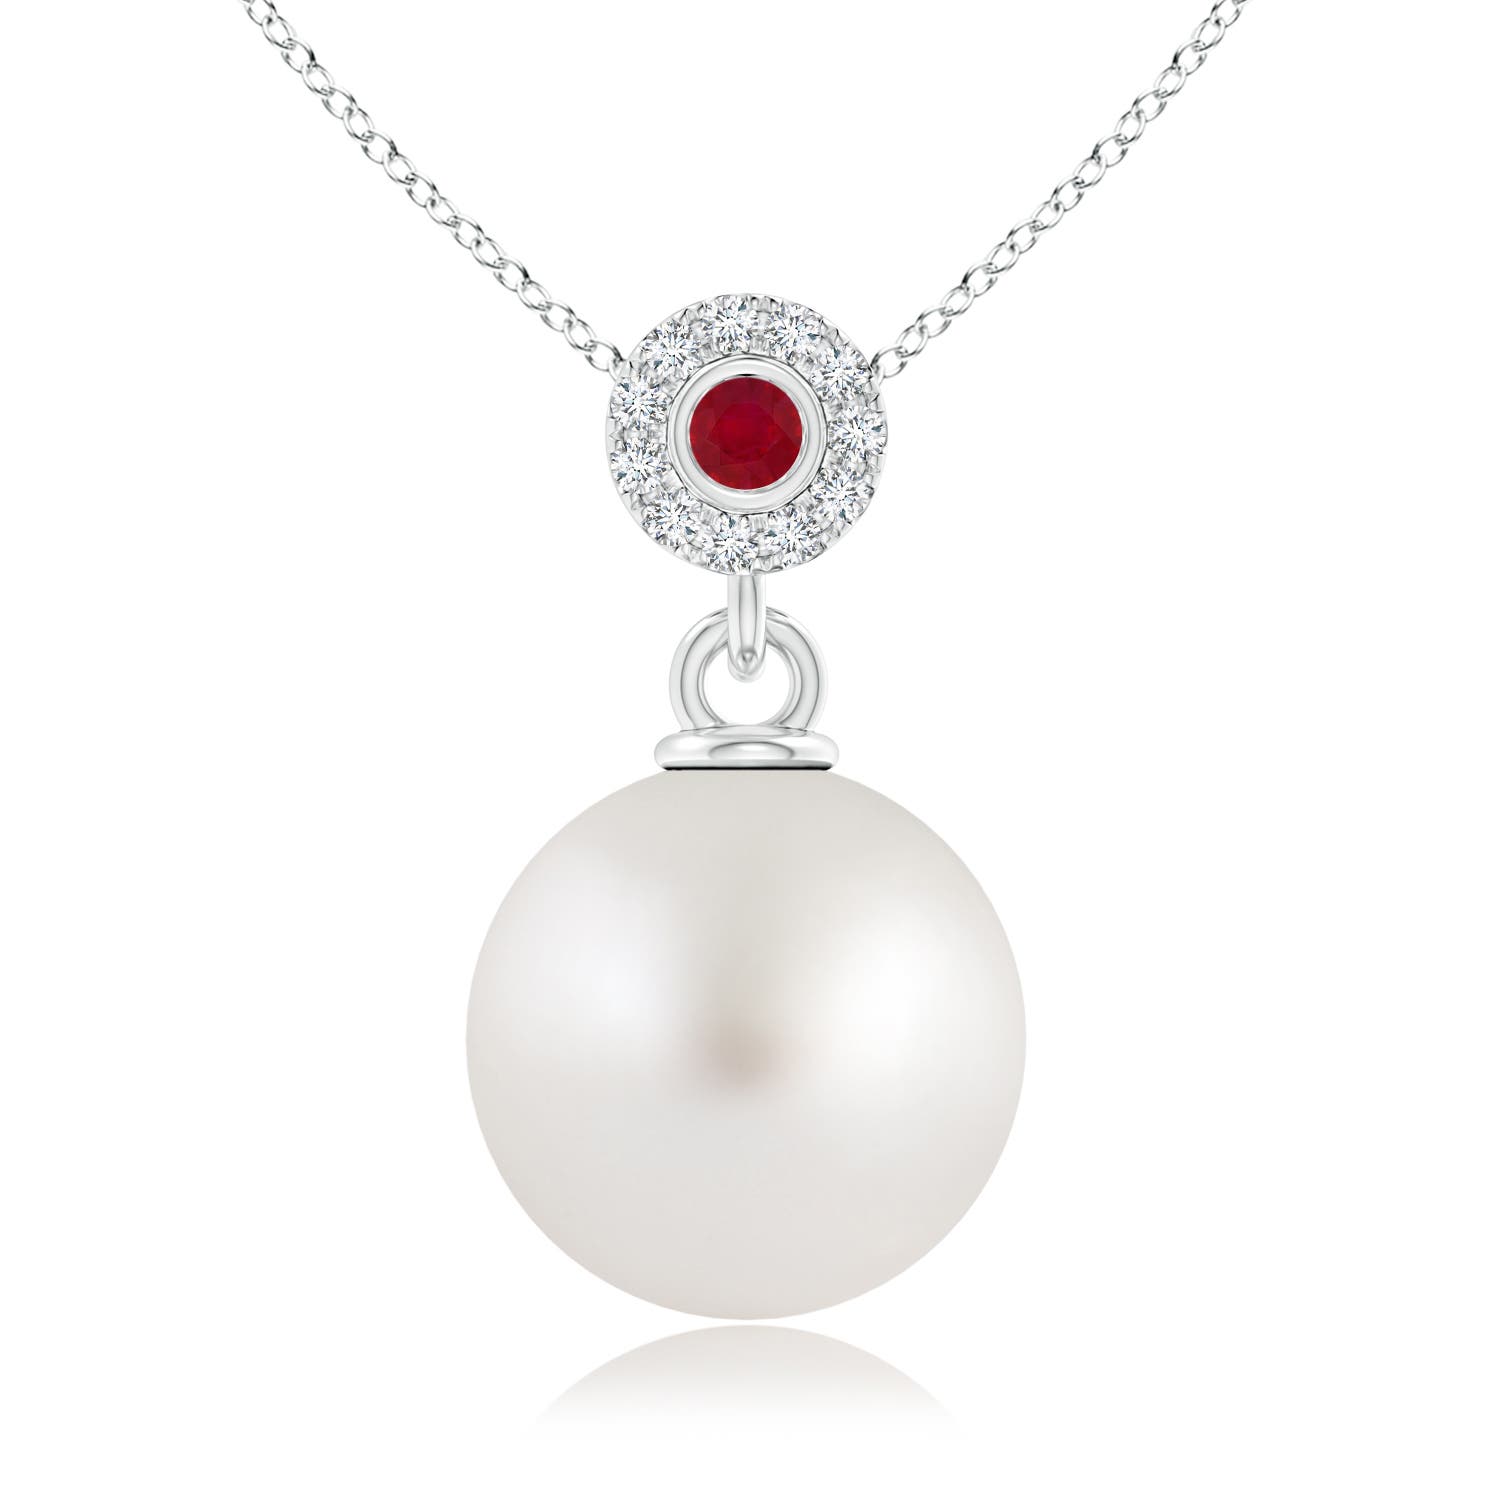 AA - South Sea Cultured Pearl / 7.31 CT / 14 KT White Gold